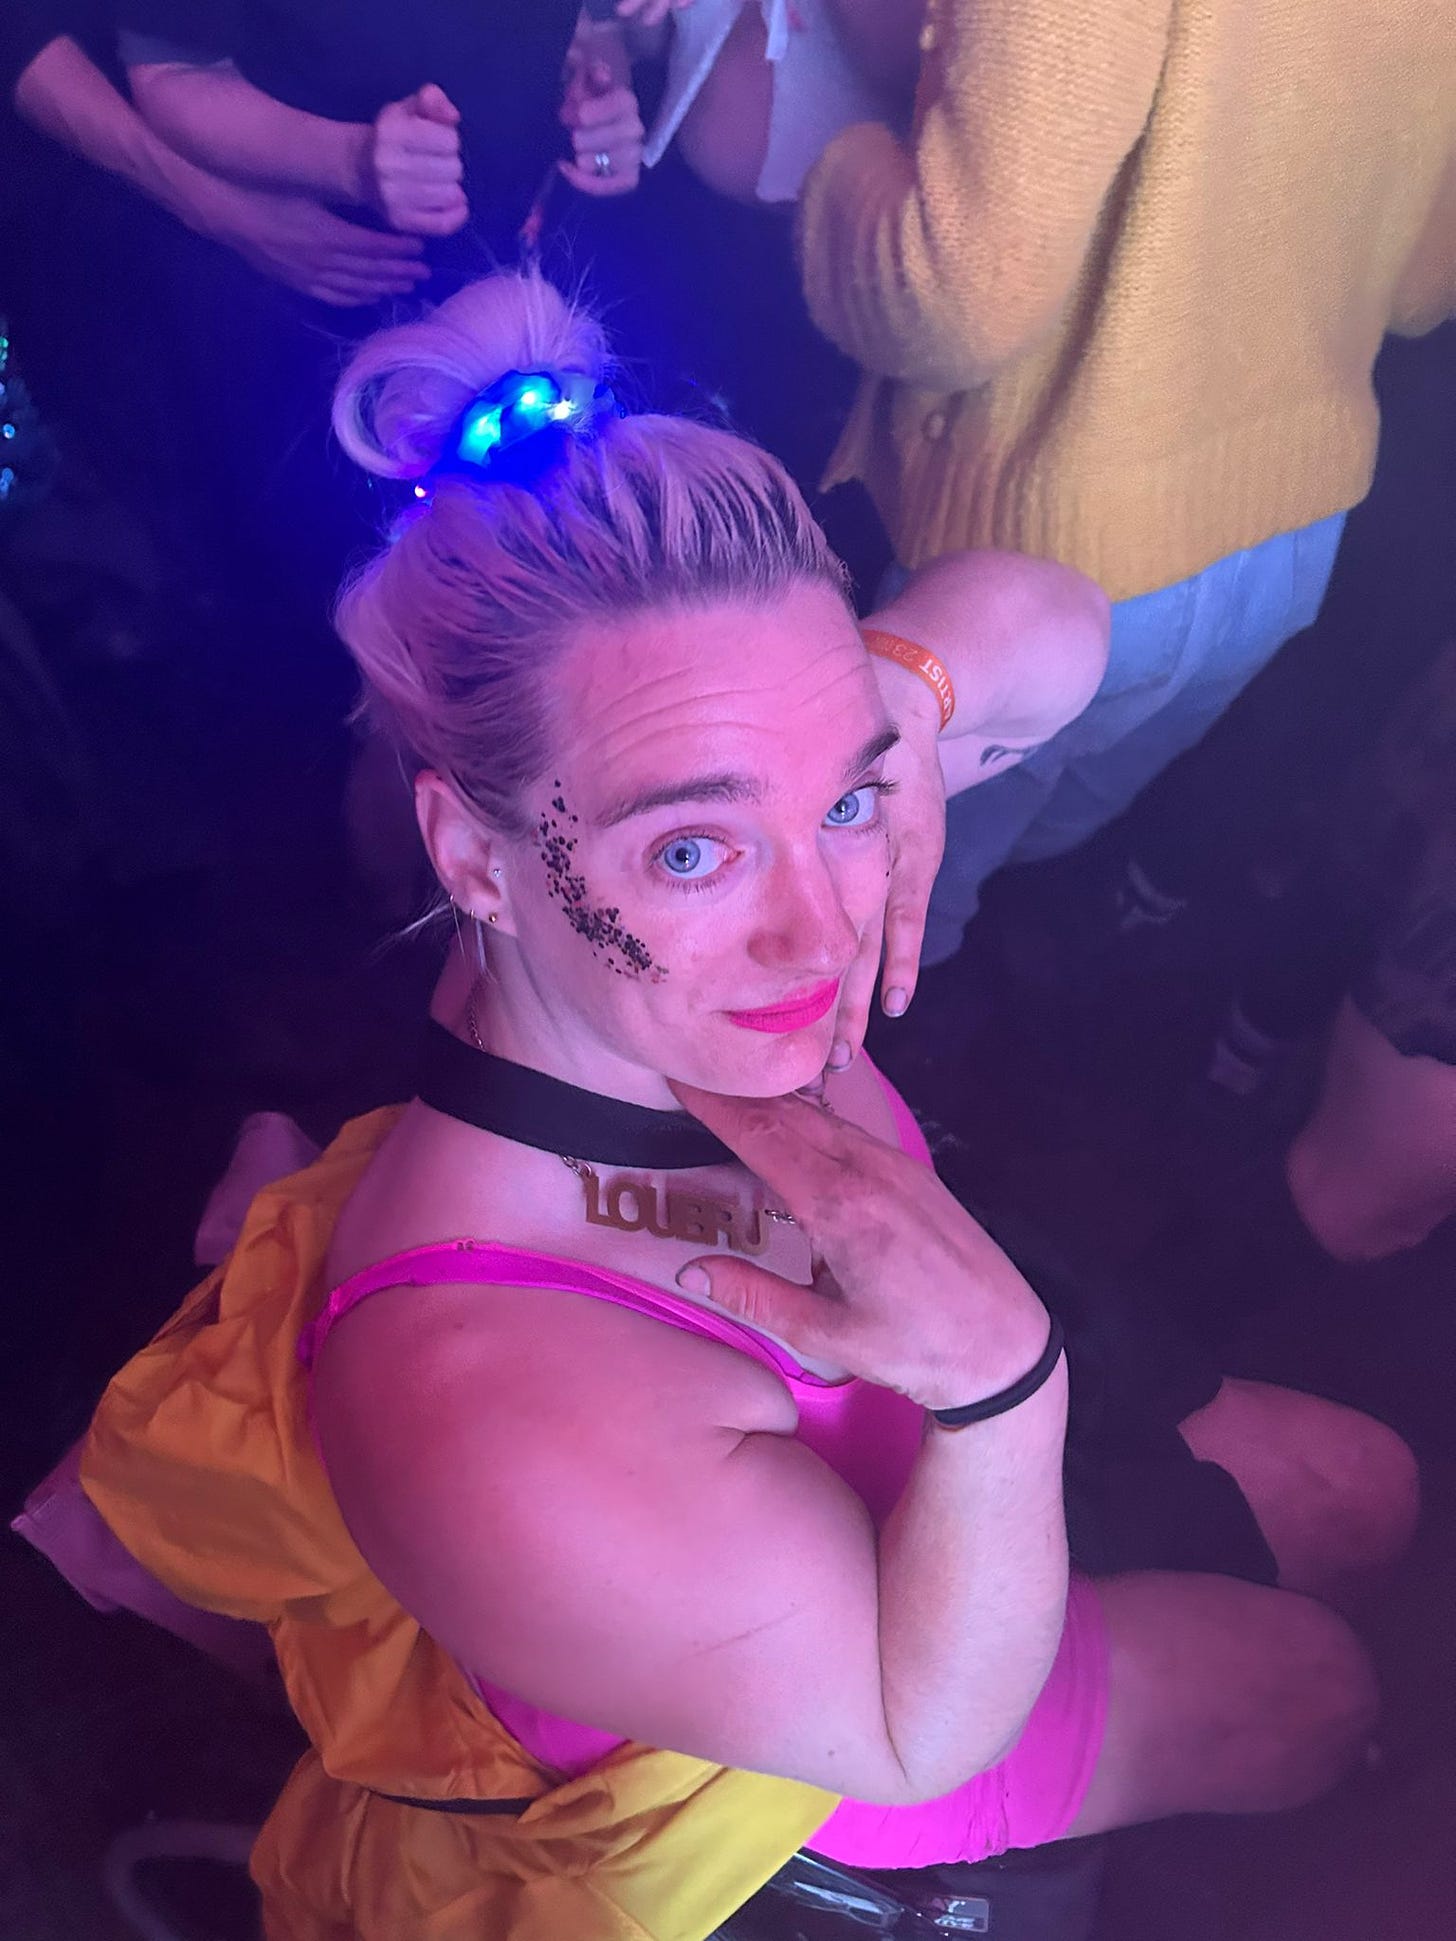 I am wearing a pink bodycon dress and posing with my hands under my chin. Covered in mud and glitter, I wear an LED scrunchie in my hair and have a rain coat tied around my waist as I sit in the middle of a festival crowd. 